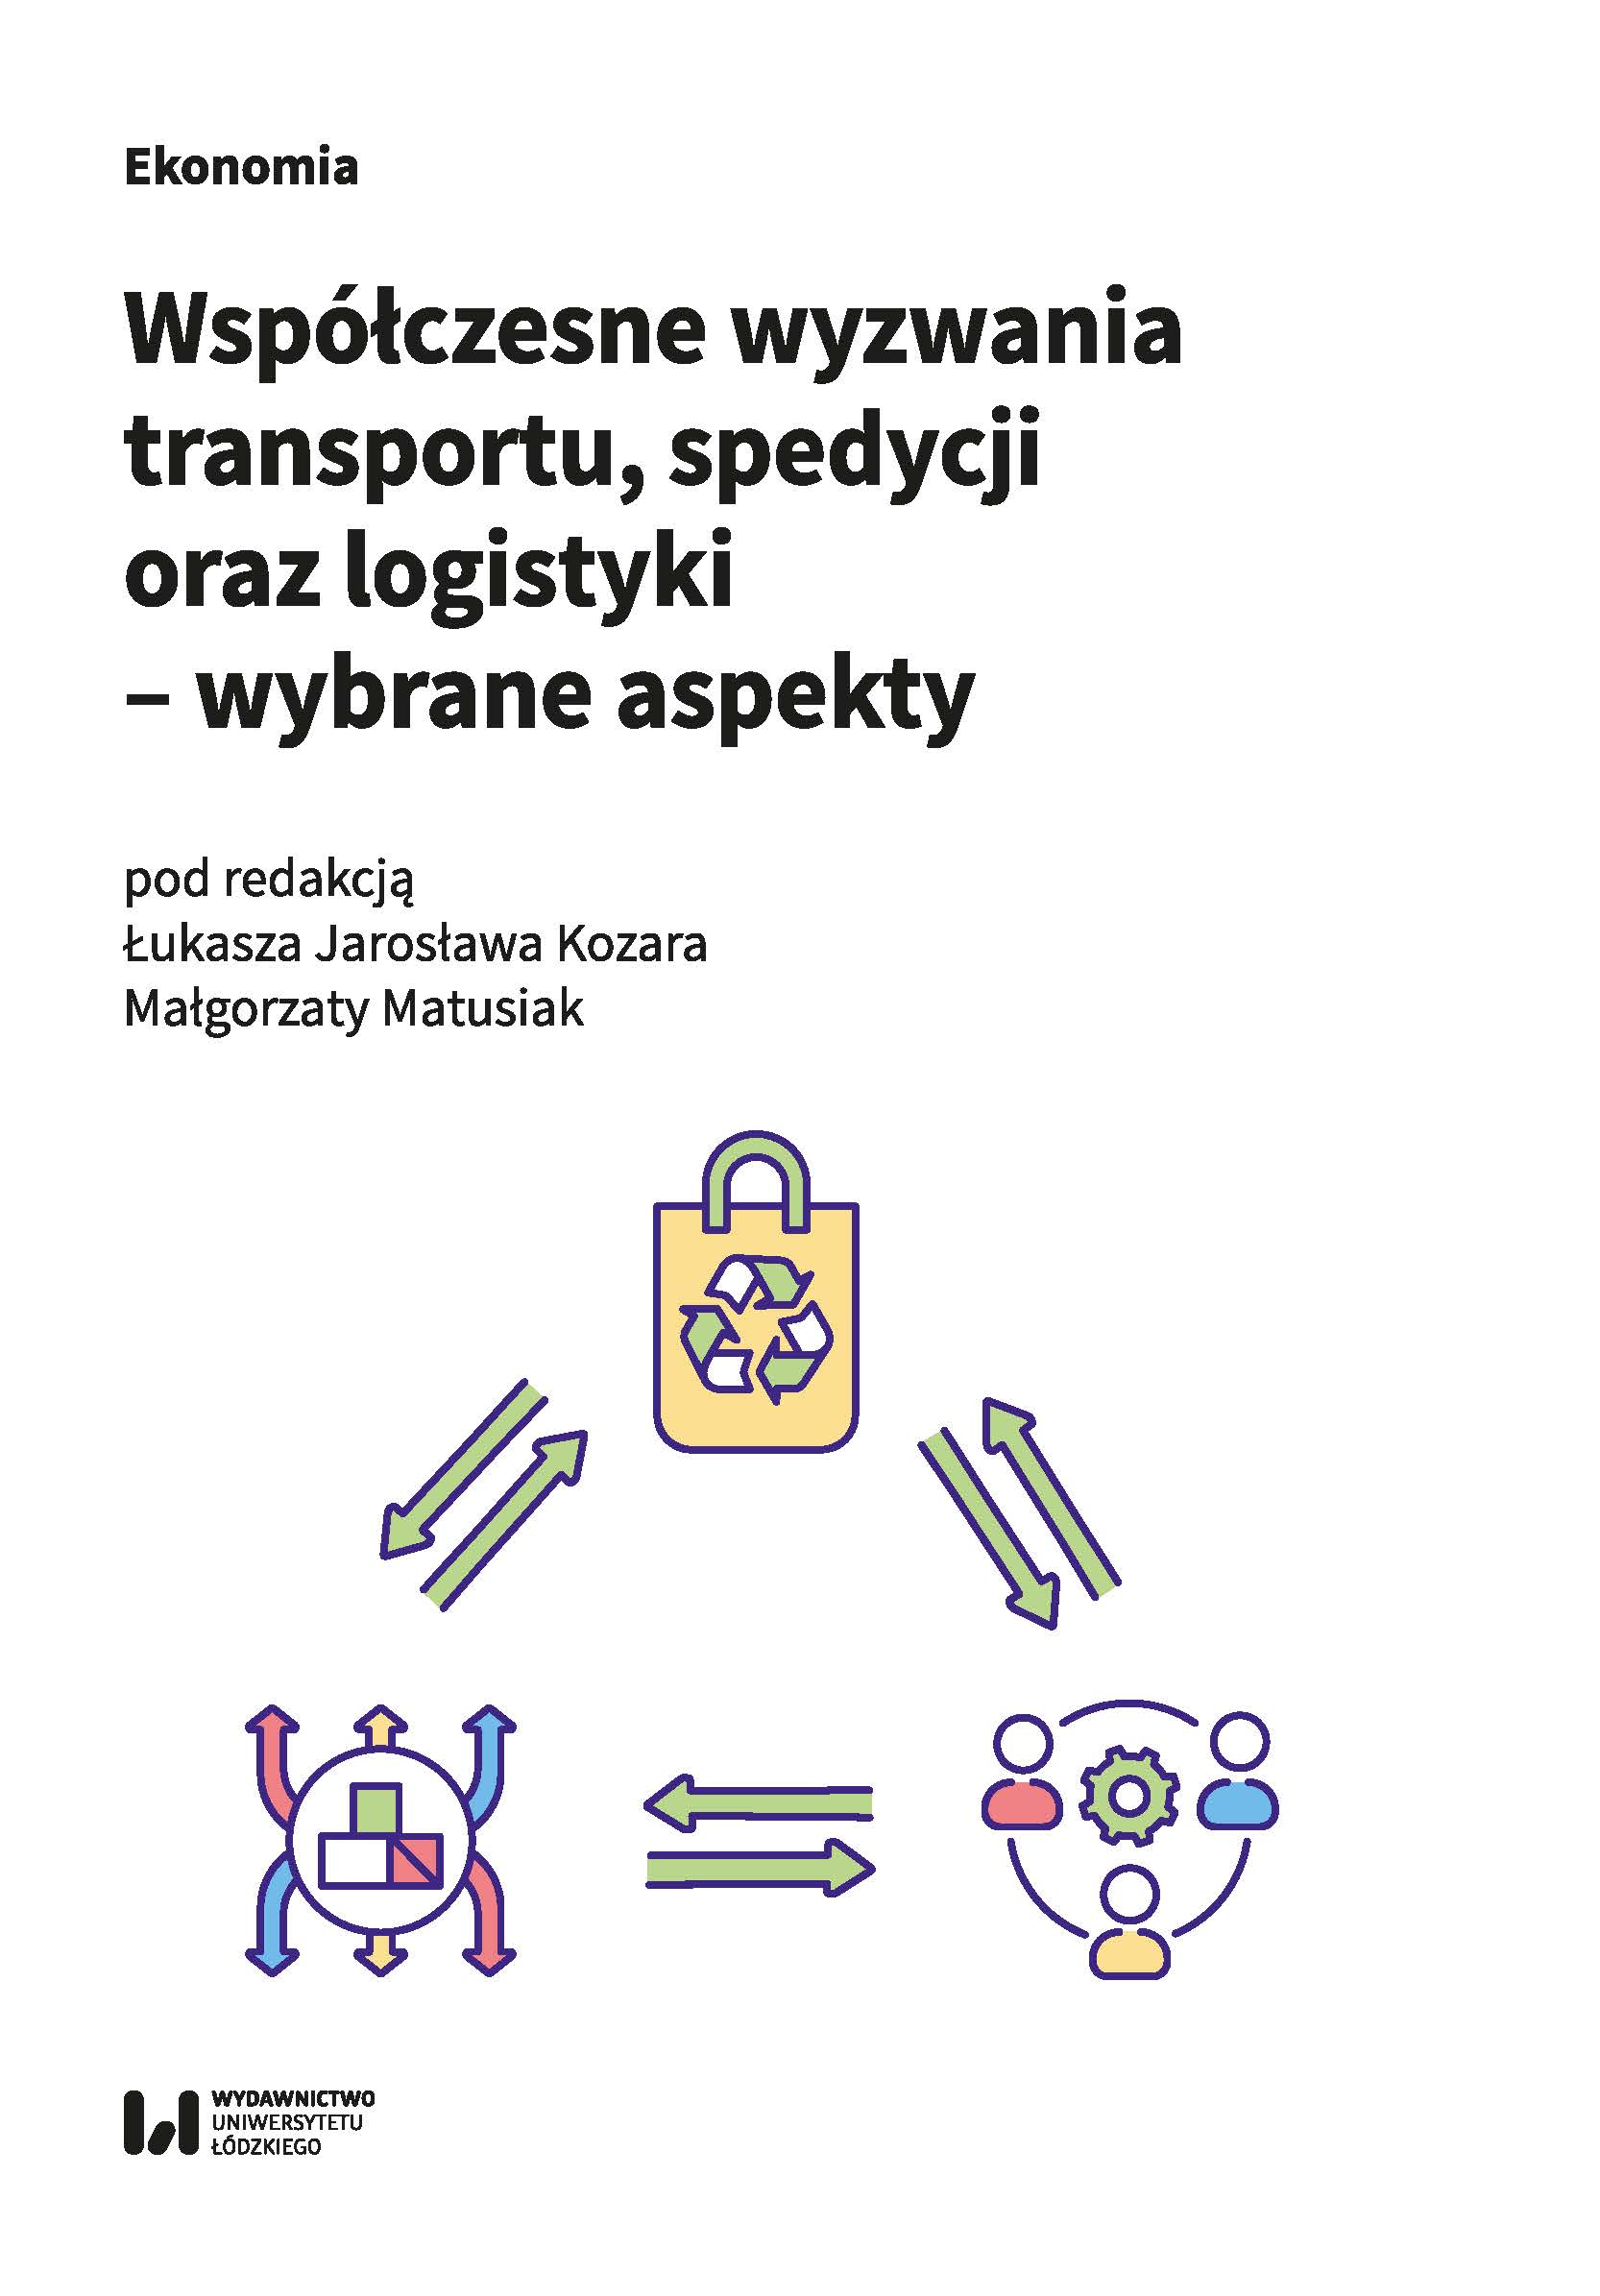 Mobility hubs in the context of urban logistics – a proposal for Lodz Cover Image